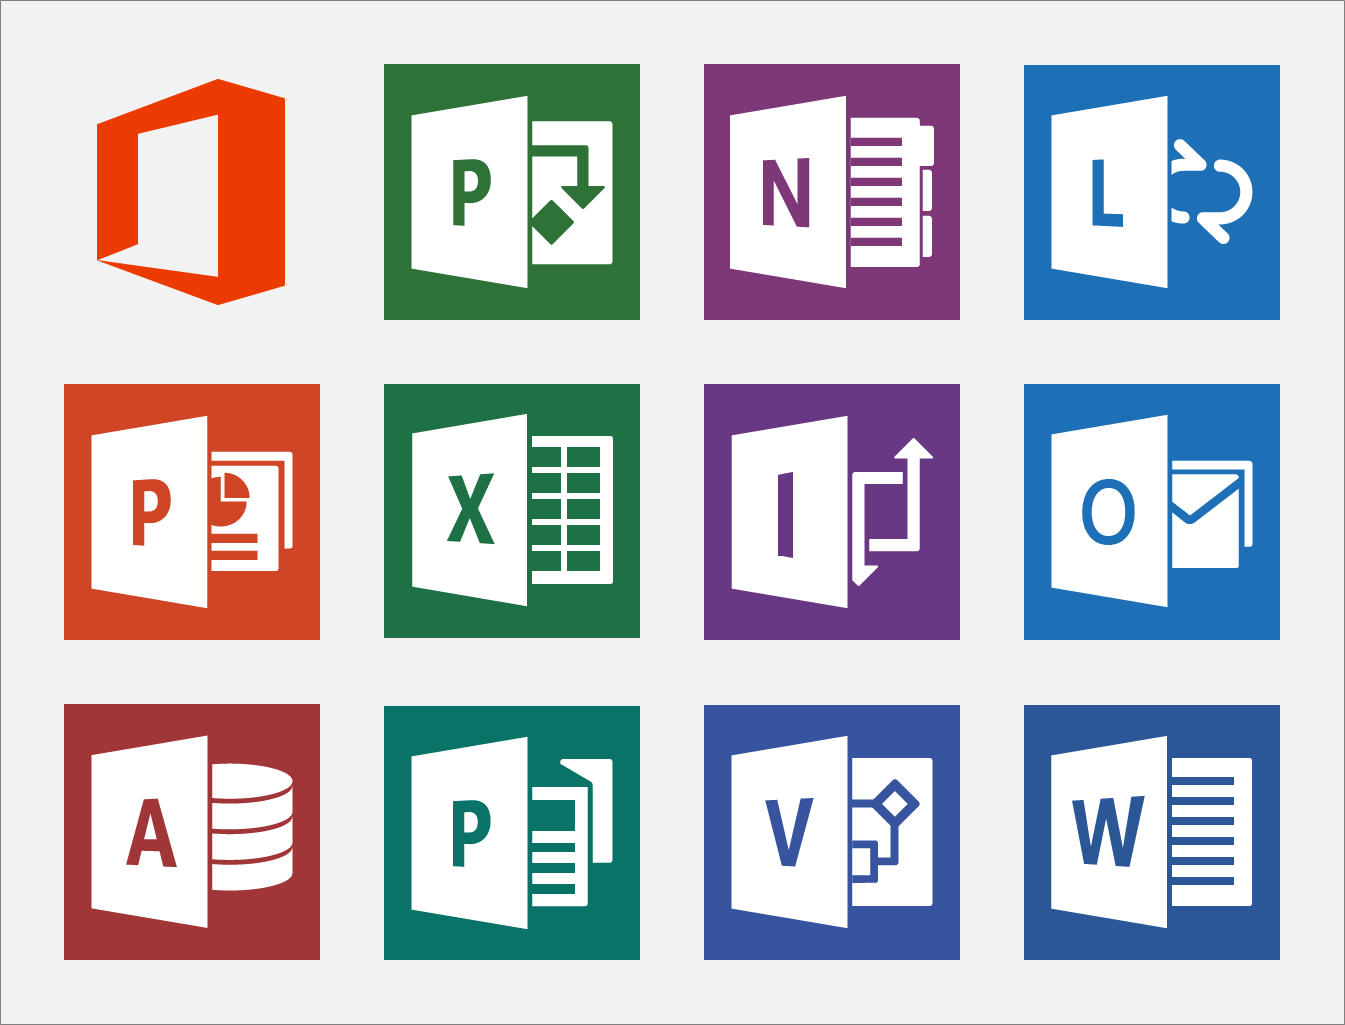 11 Microsoft Office 365 Icon Images Ms Office Office 365 Desktop